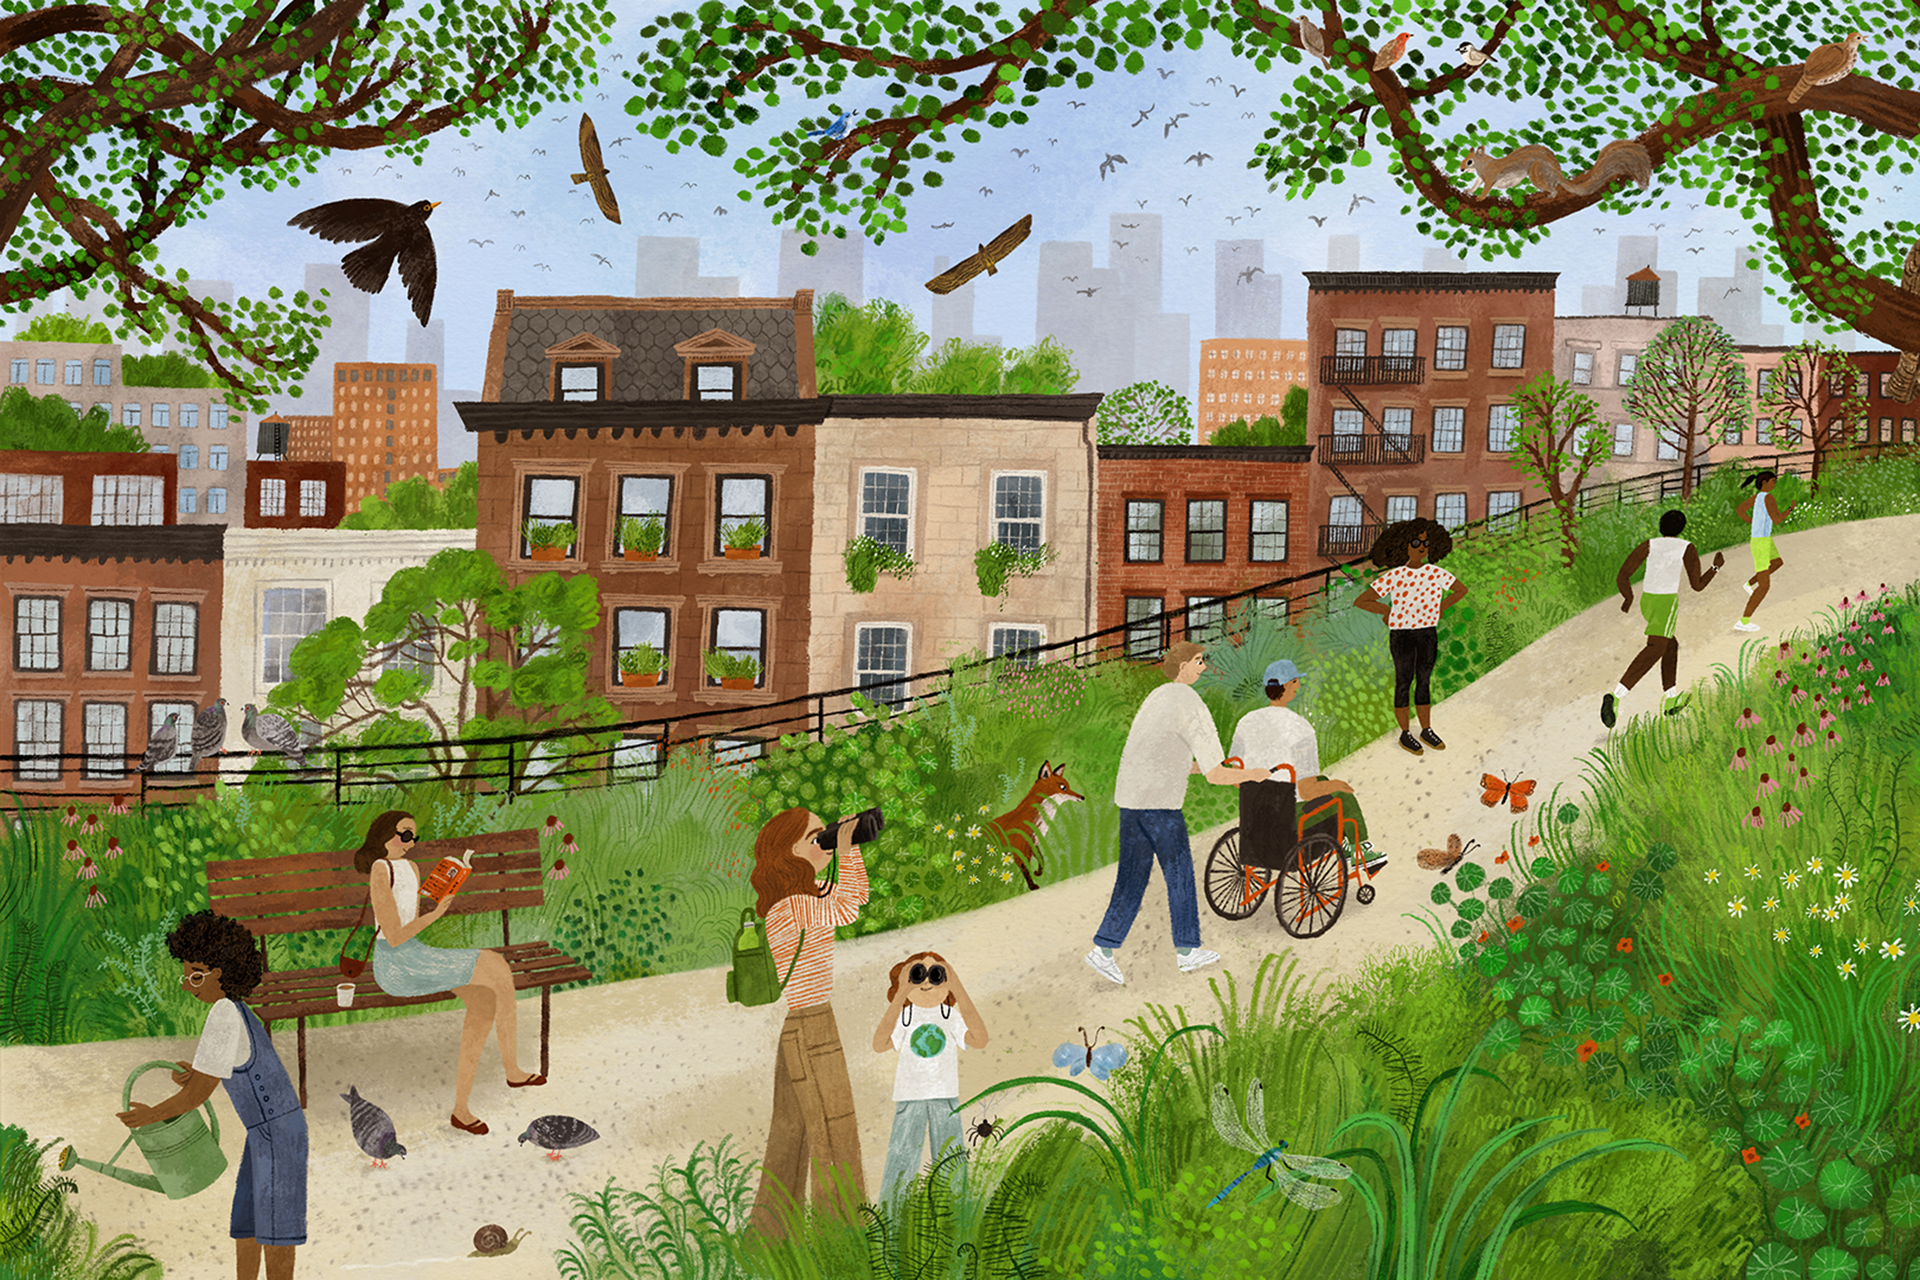 An illustration of a neighborhood of row houses bordered by a grass, flowering bushes, and a sandy path. Community members enjoy the surroundings, walking on the path, reading on a bench, watering plants, and using binoculars to look at the trees. One person pushes another person in a wheelchair.